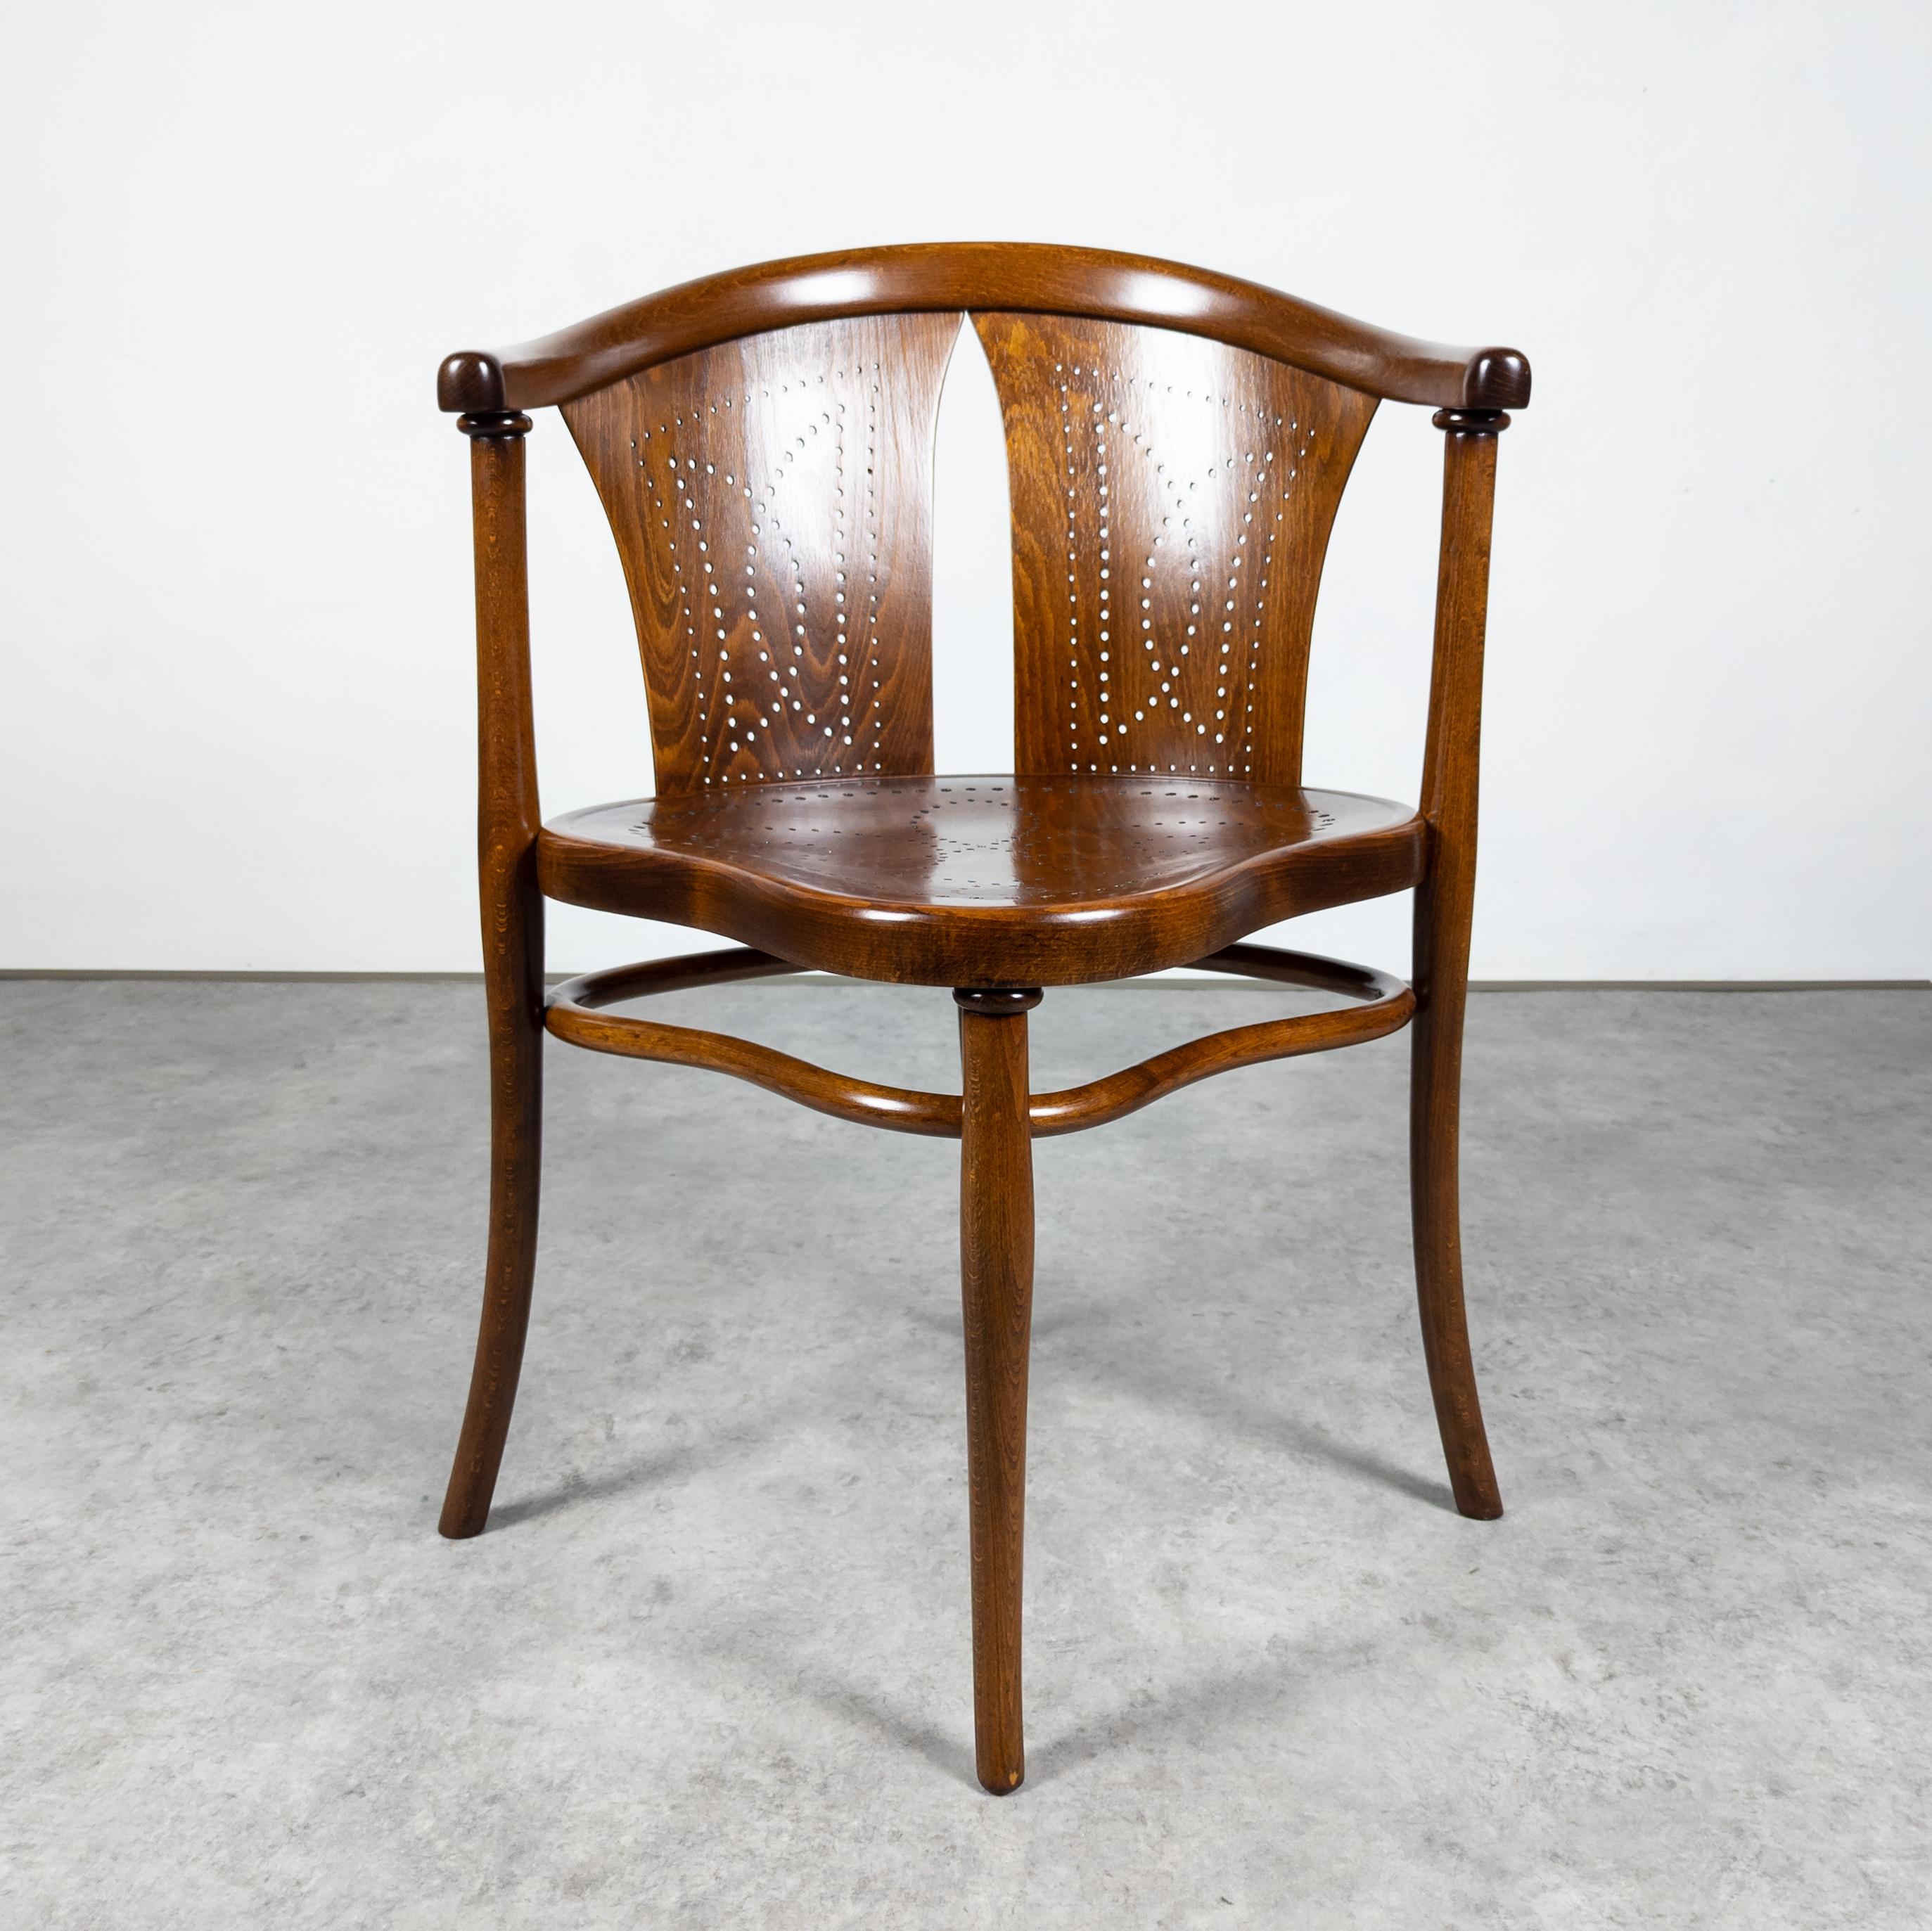 Rare model featured in 1904 Thonet catalogue. Bent solid beech with perforated plywood seat and back. Labeled and imprinted with Thonet factory trade mark. Expertly restored by a professional studio with long history of preserving rare and unique